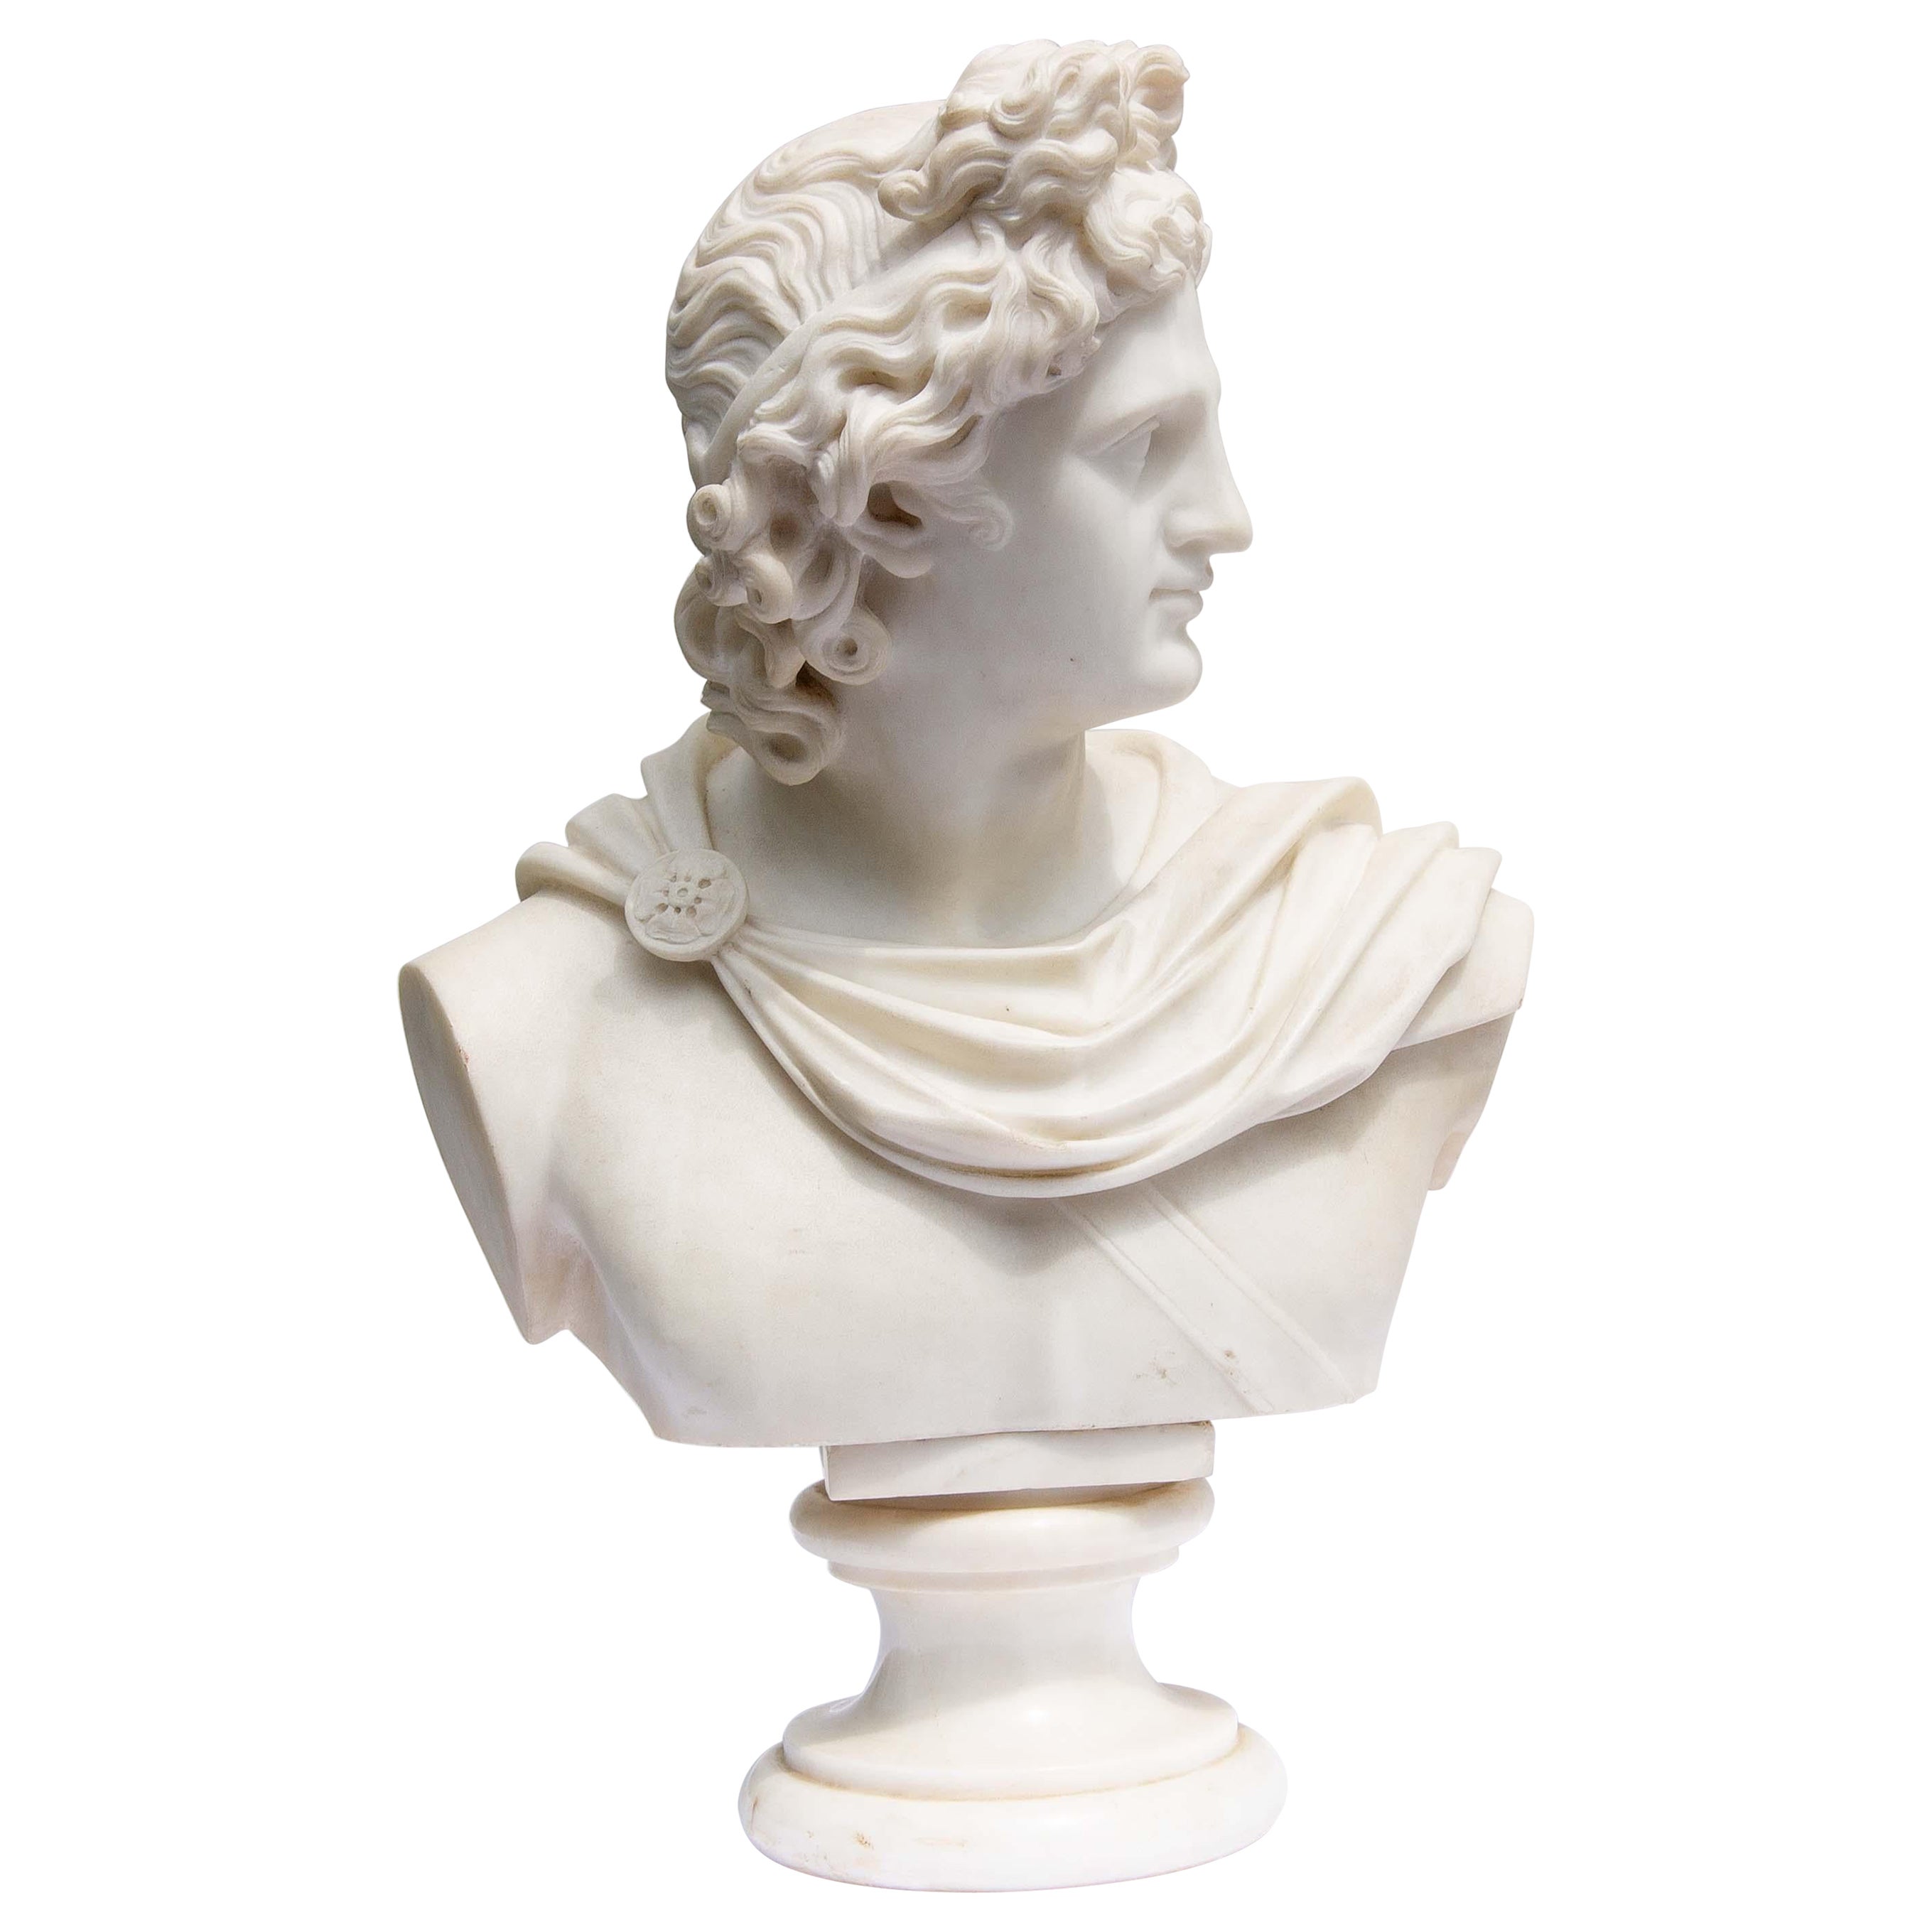 Unknown Figurative Sculpture - Large Antique Marble Bust of Apollo of Belvedere 19th Century